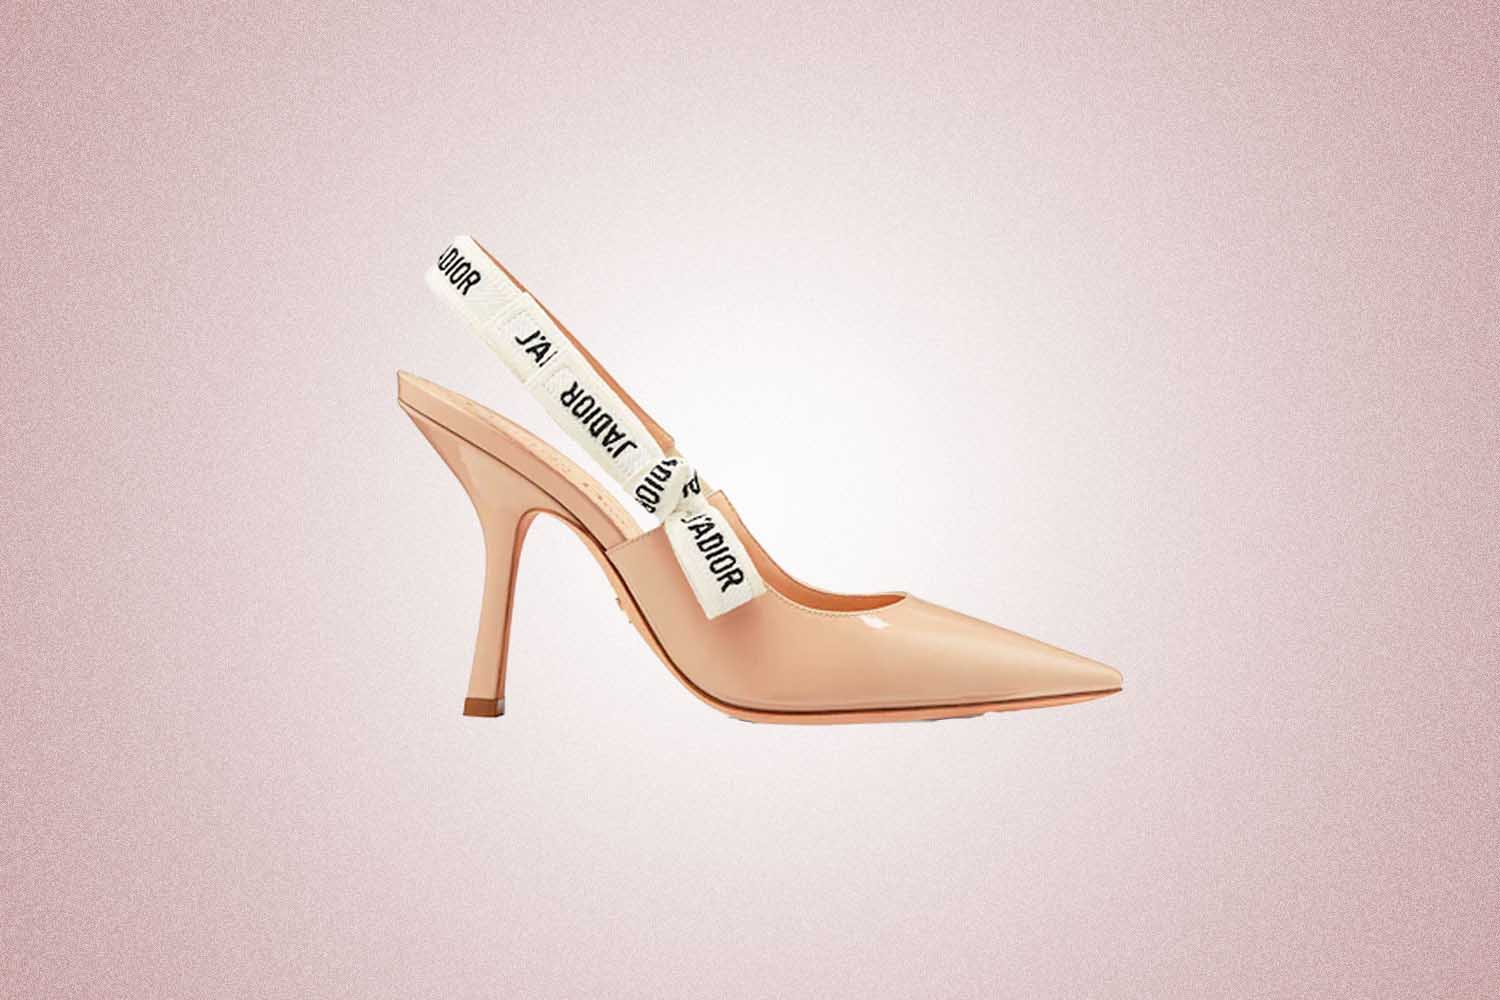 Nude patent calfskin pumps from Dior with a embroidered 'J'ADIOR' ribbon on the back, a perfect Valentine’s Day gift for 2022, on a pink background.